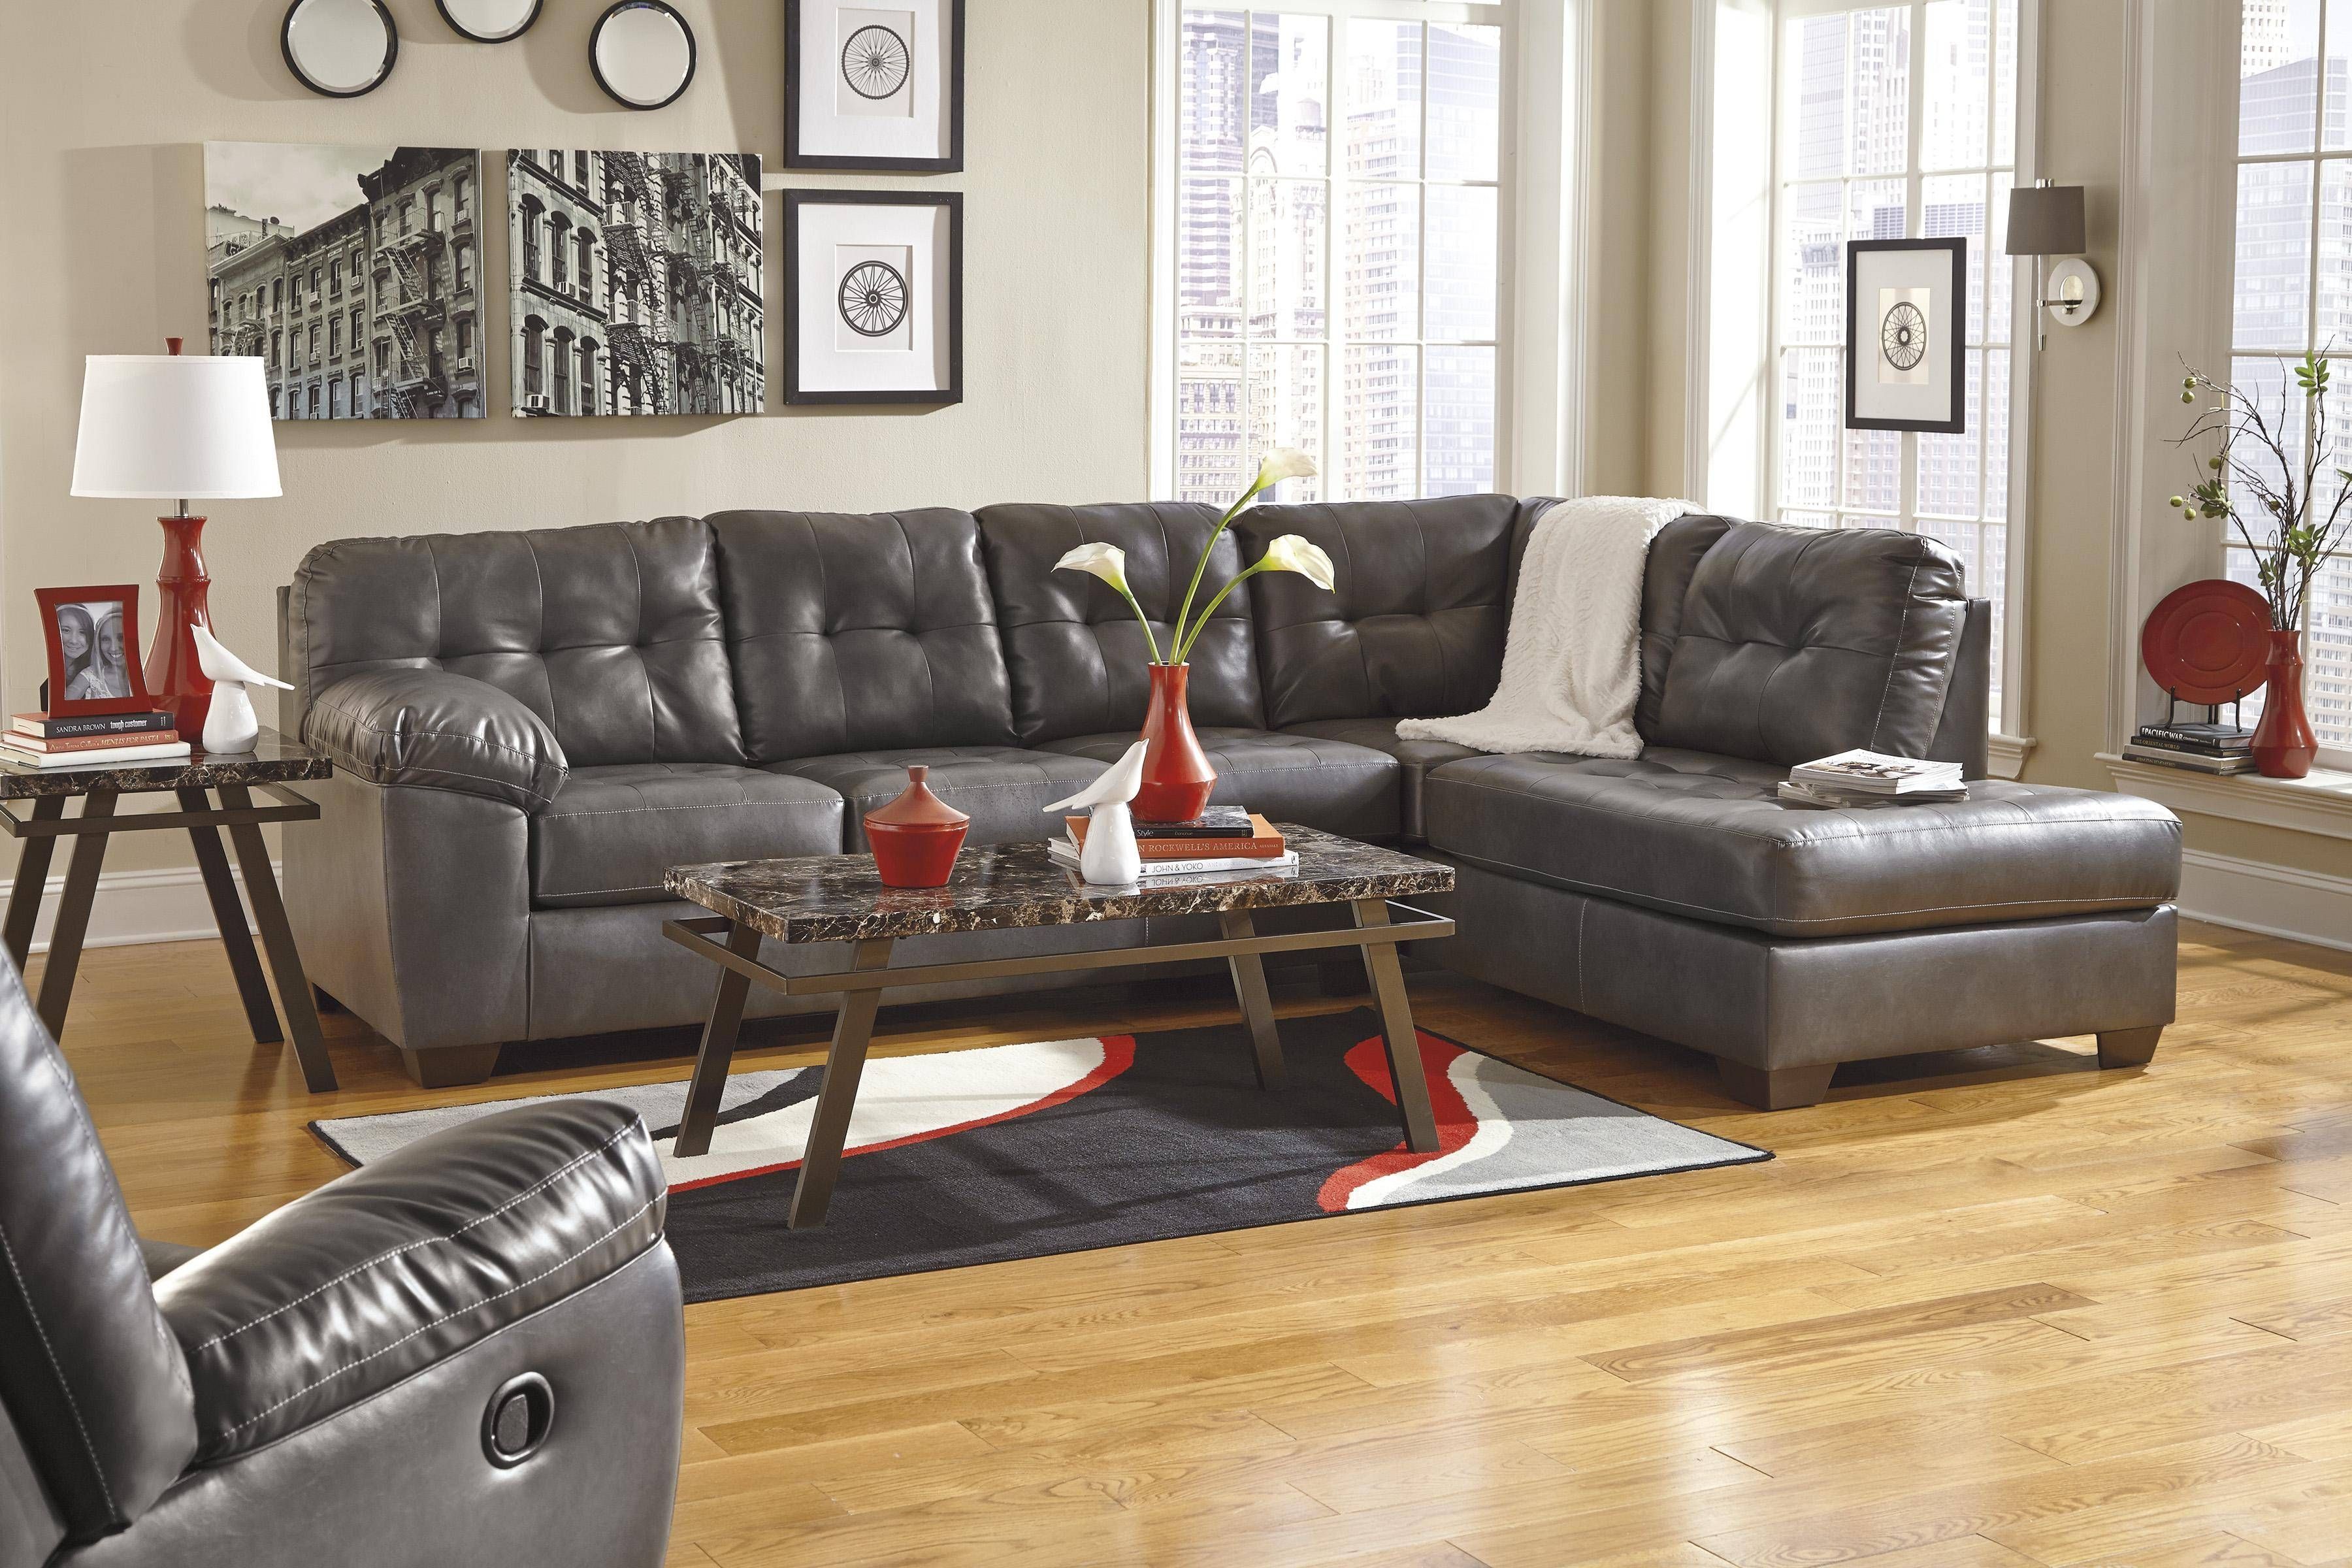 Faux Leather Sectional W/ Right Chaise & Tuftingsignature Pertaining To Ashley Faux Leather Sectional Sofas (View 4 of 15)